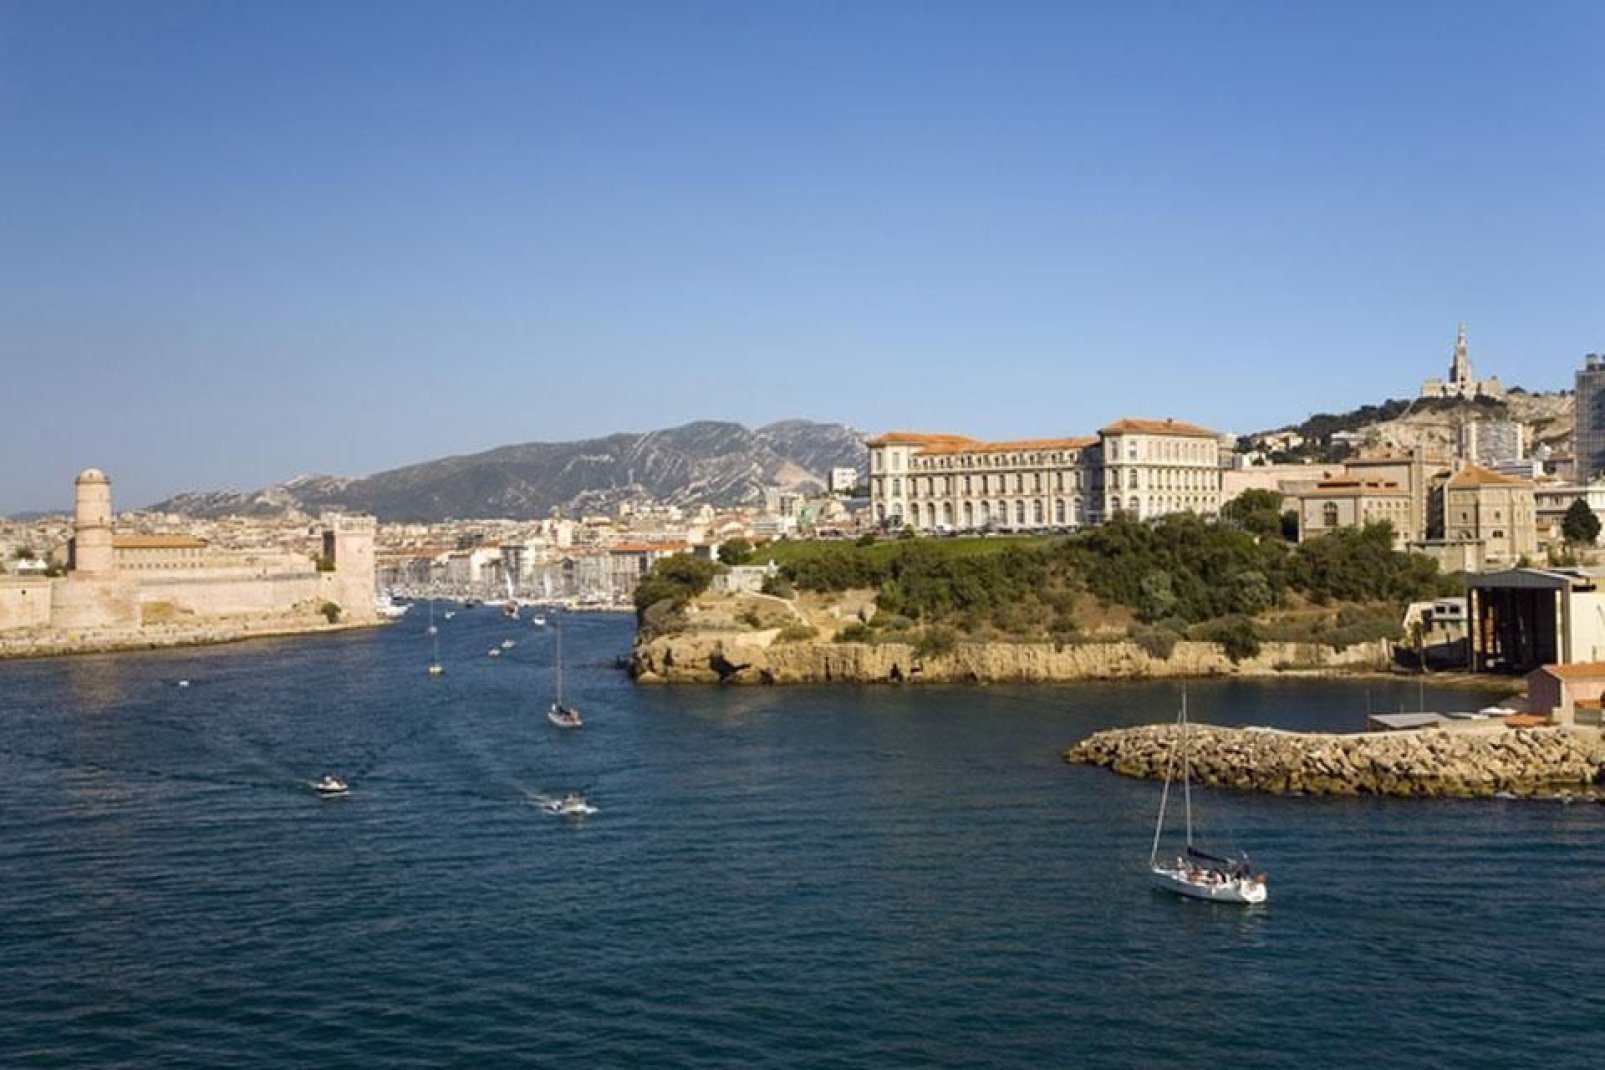 As you enter Marseille from the sea, you will be greeted by Pharo Palace and Fort Saint-Jean.